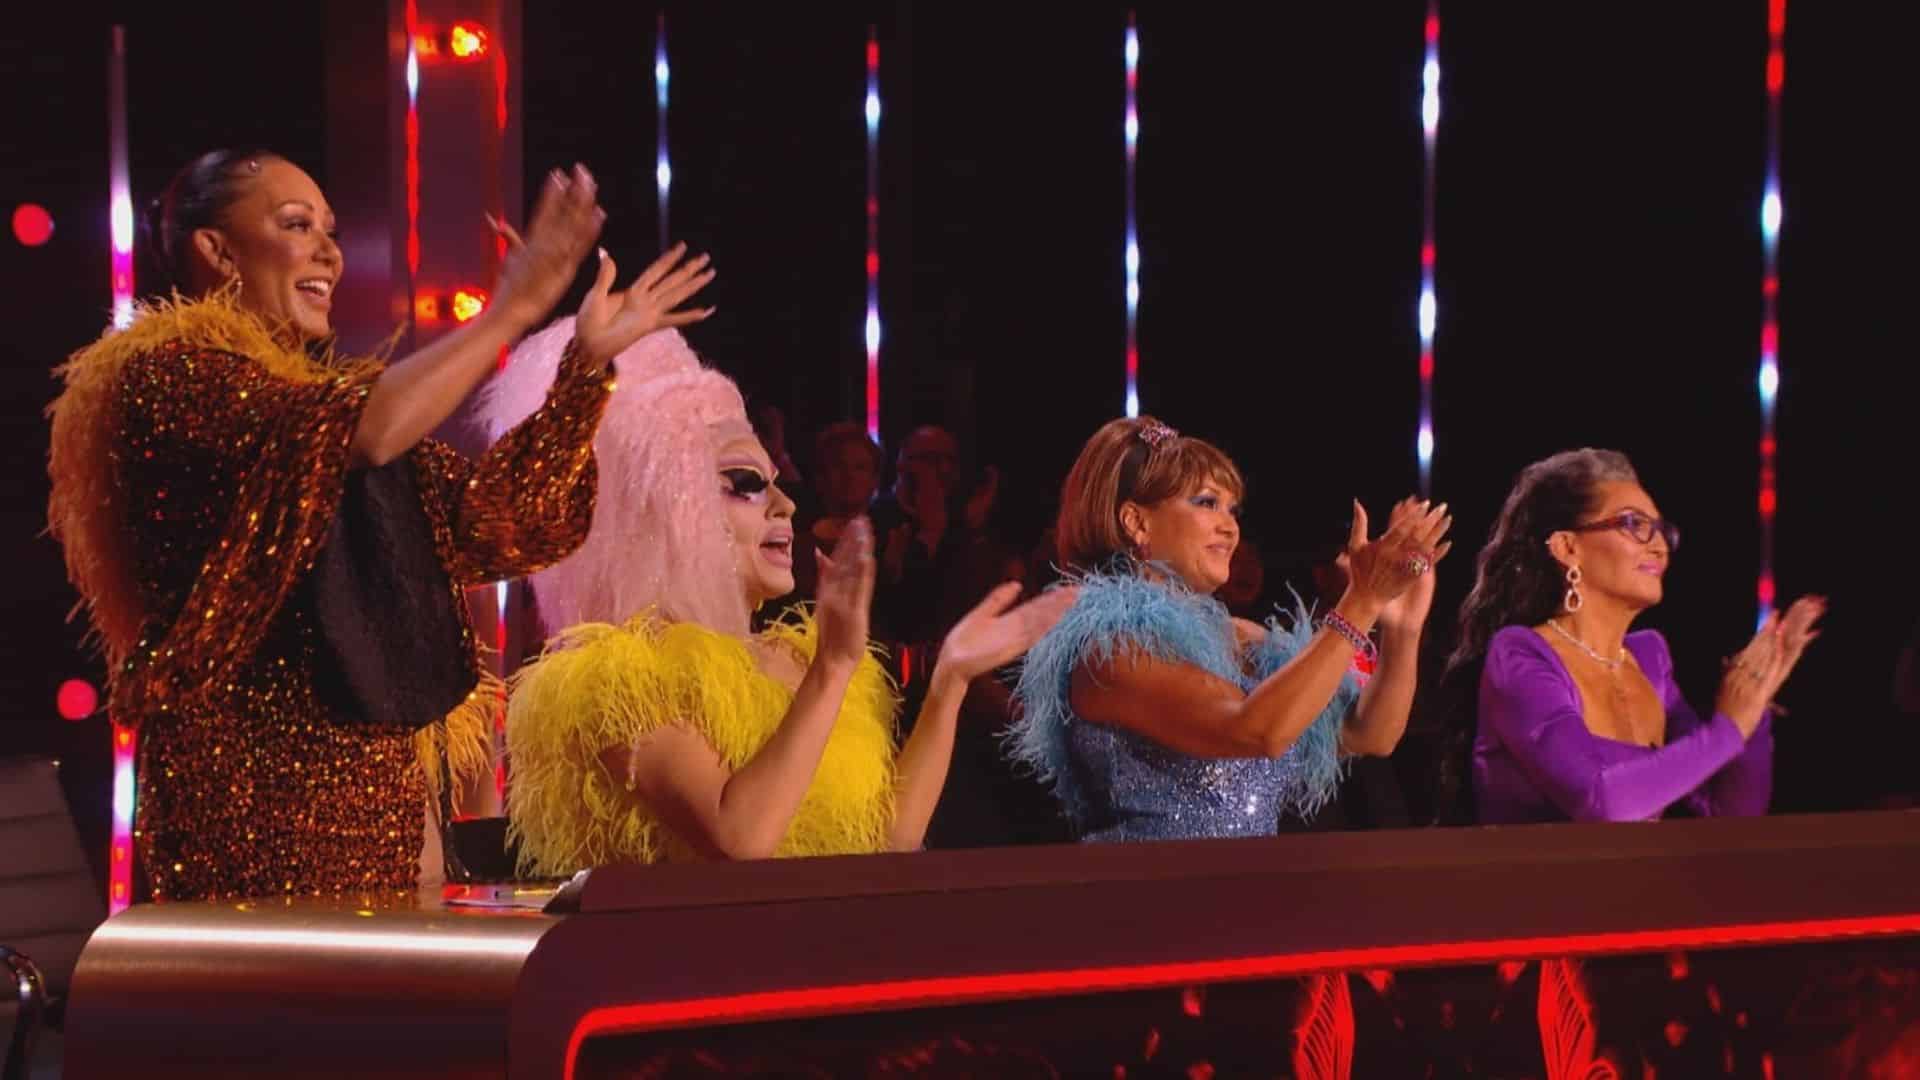 Mel B, Trixie Mattel, Vanessa Williams, and Michelle Visage applaud a performer in this image from World of Wonder.